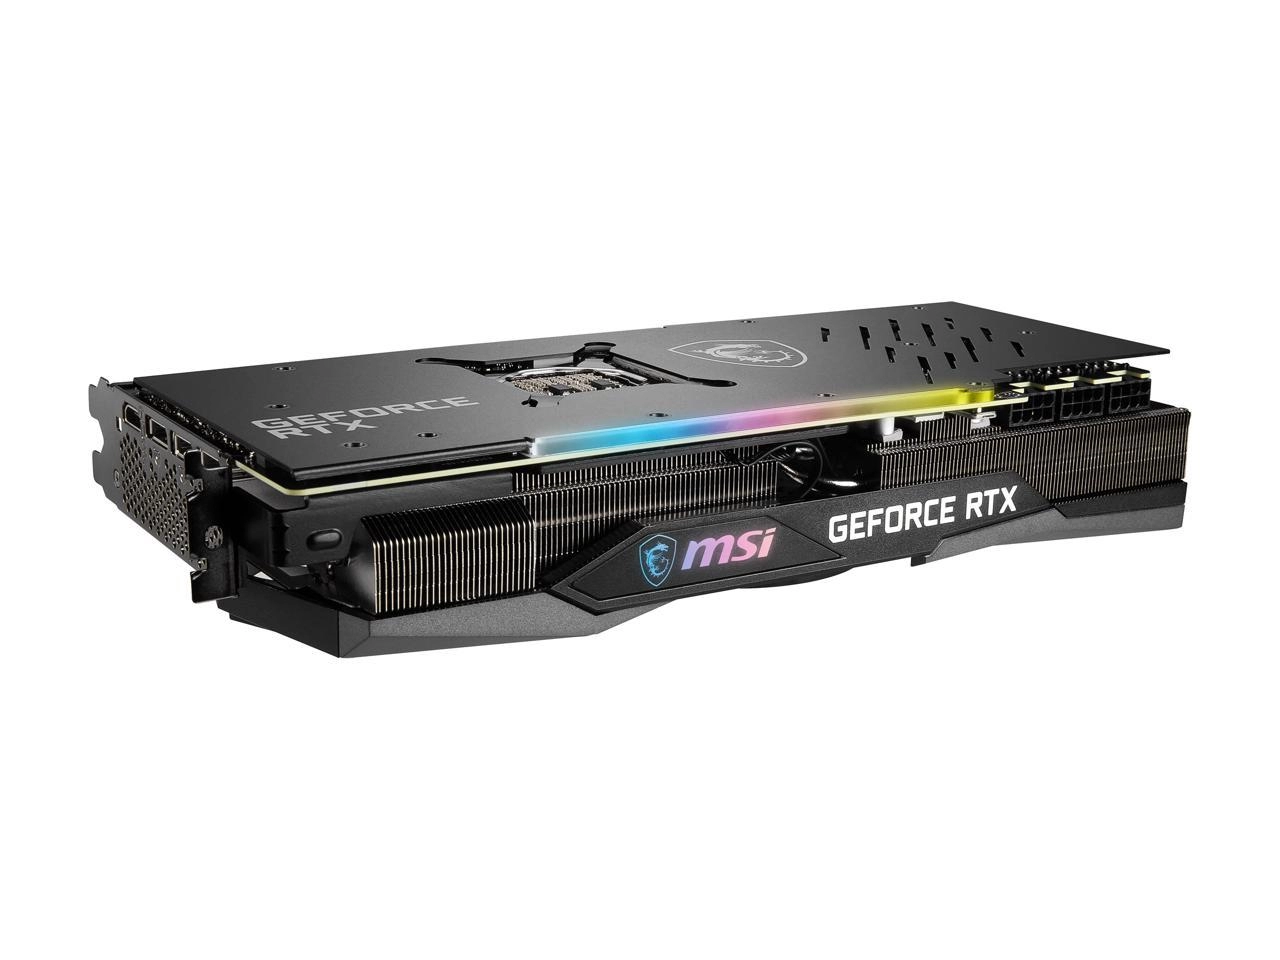 MSI GeForce RTX 3080 Ti GAMING TRIO 12G Front View